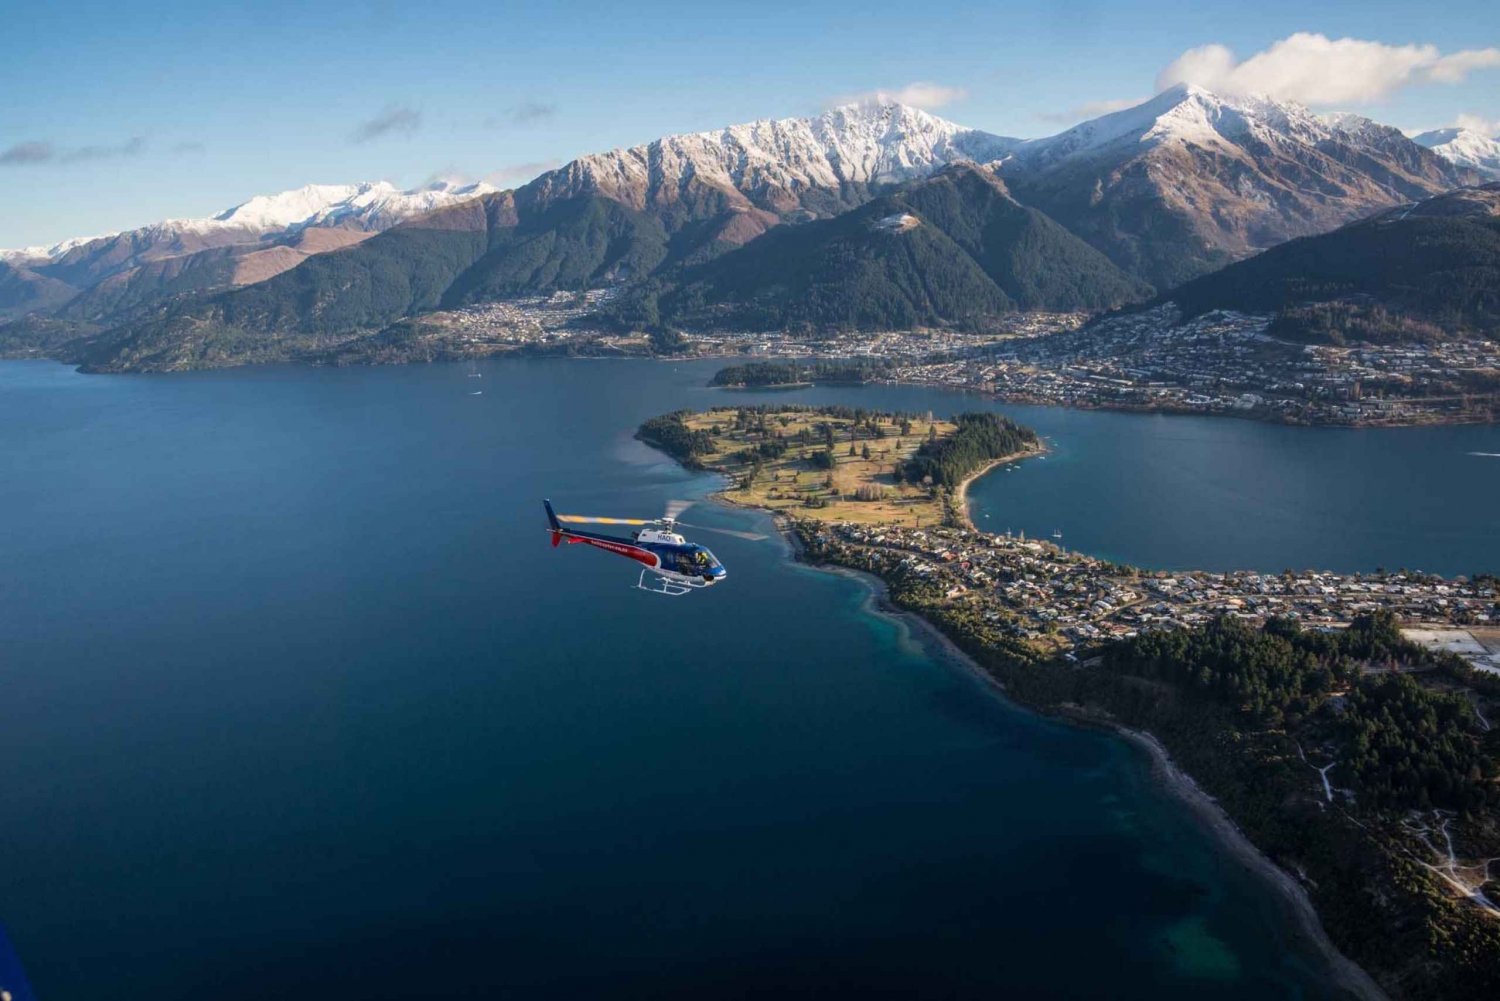 Queenstown: Milford Sound Cruise with Helicopter Transfer